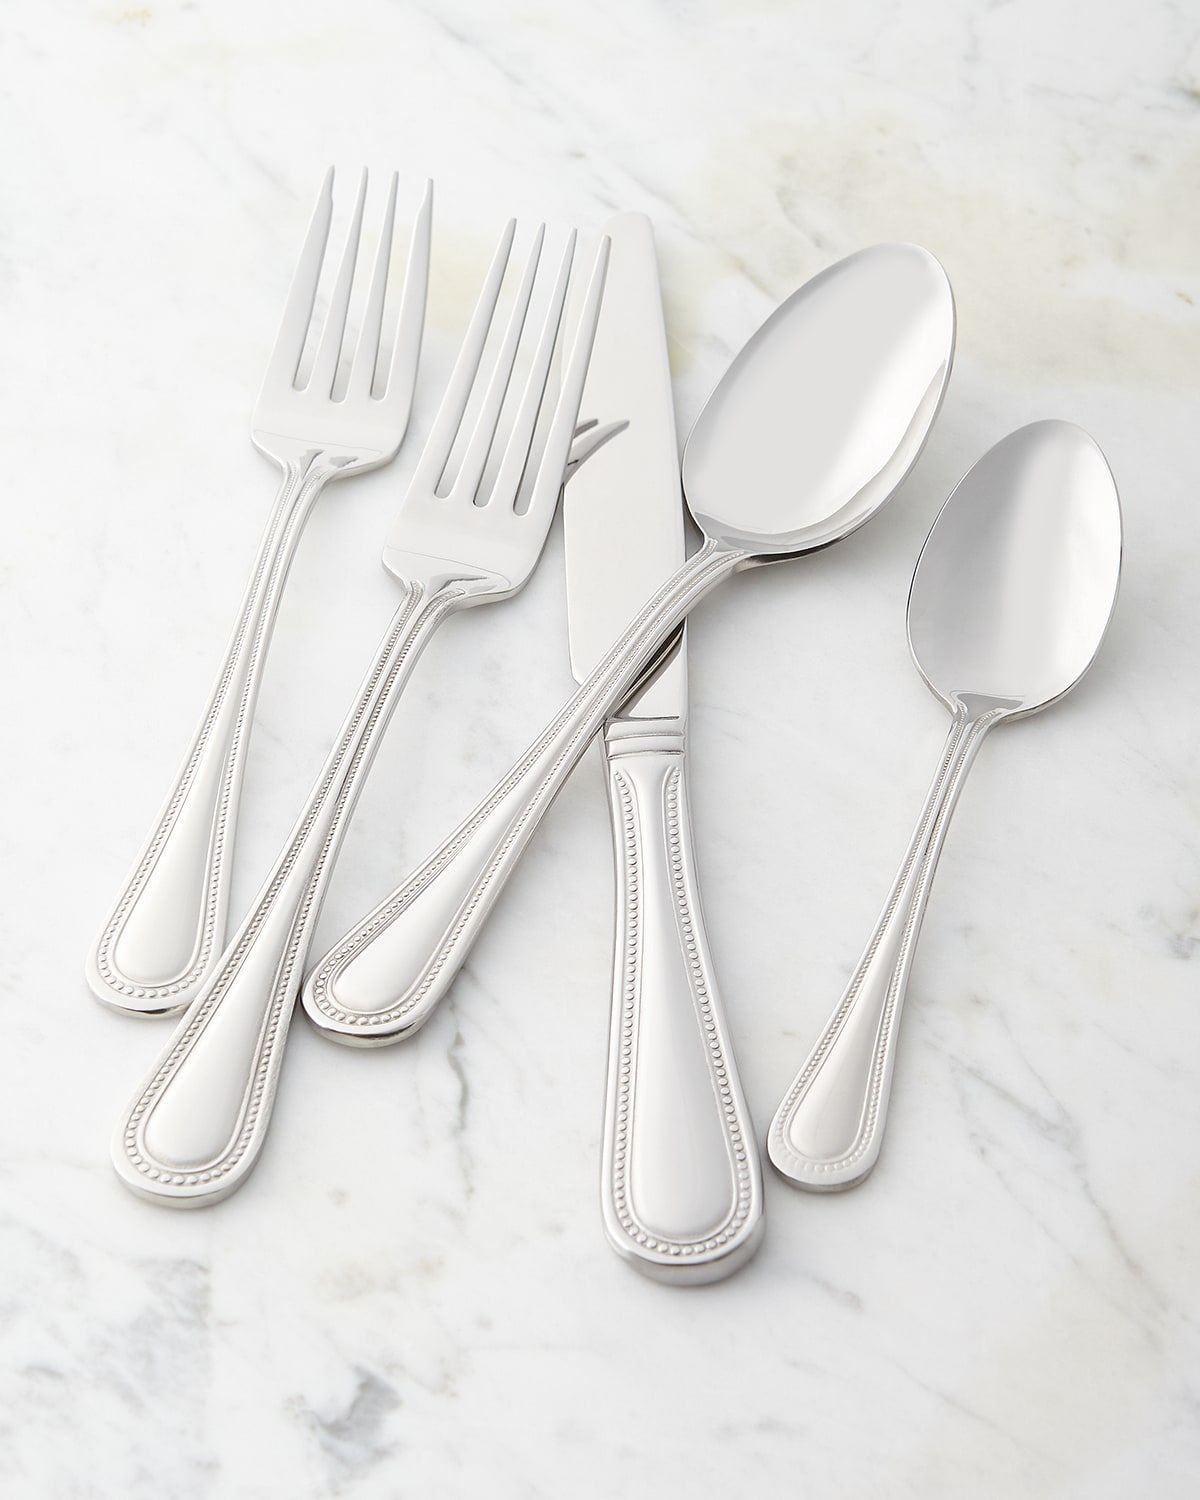 Wallace PORTICO Stainless 18/10 Glossy Silverware CHOICE Flatware 